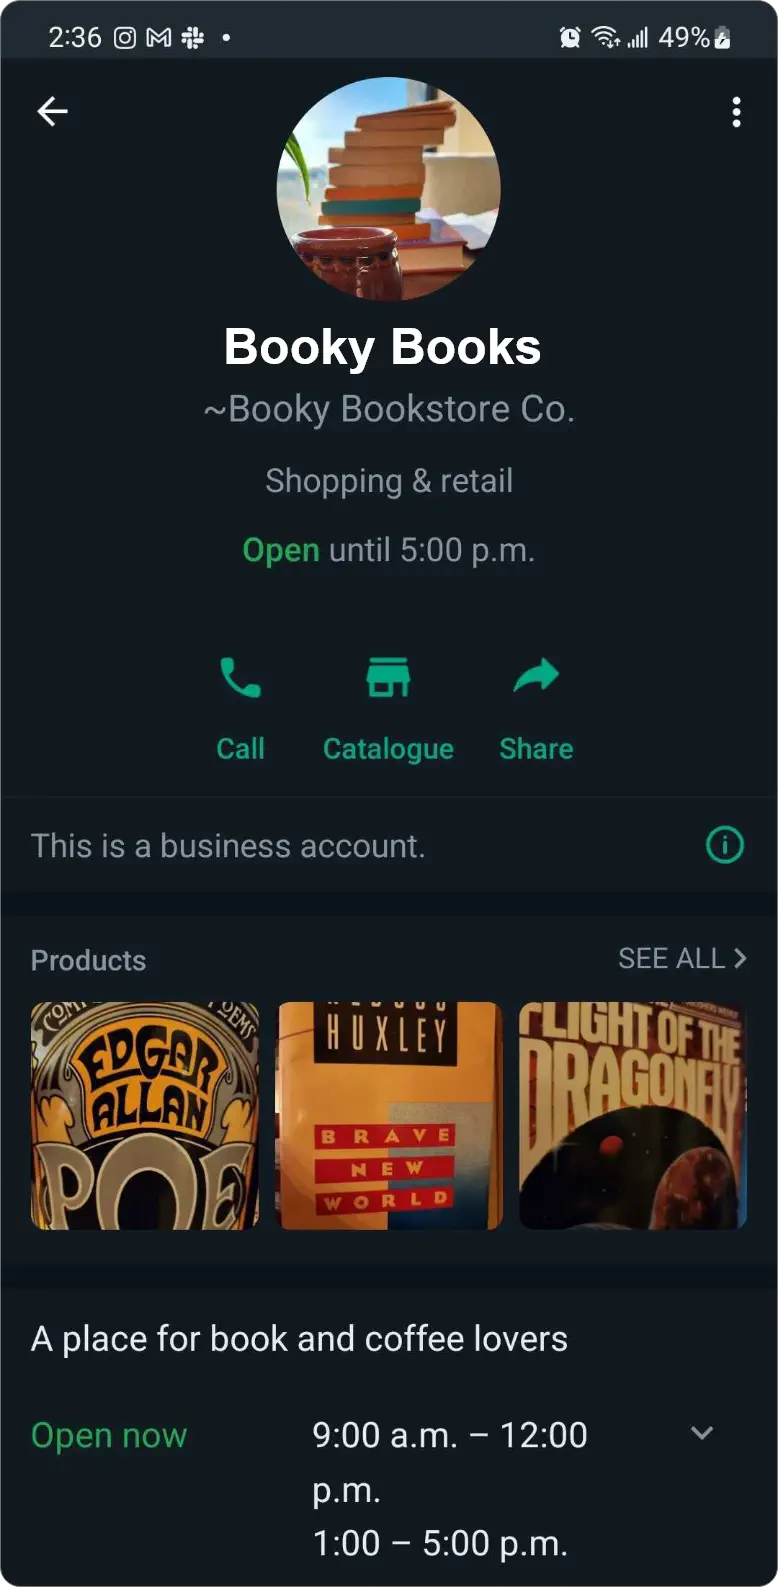 WhatsApp business profile with a catalog.